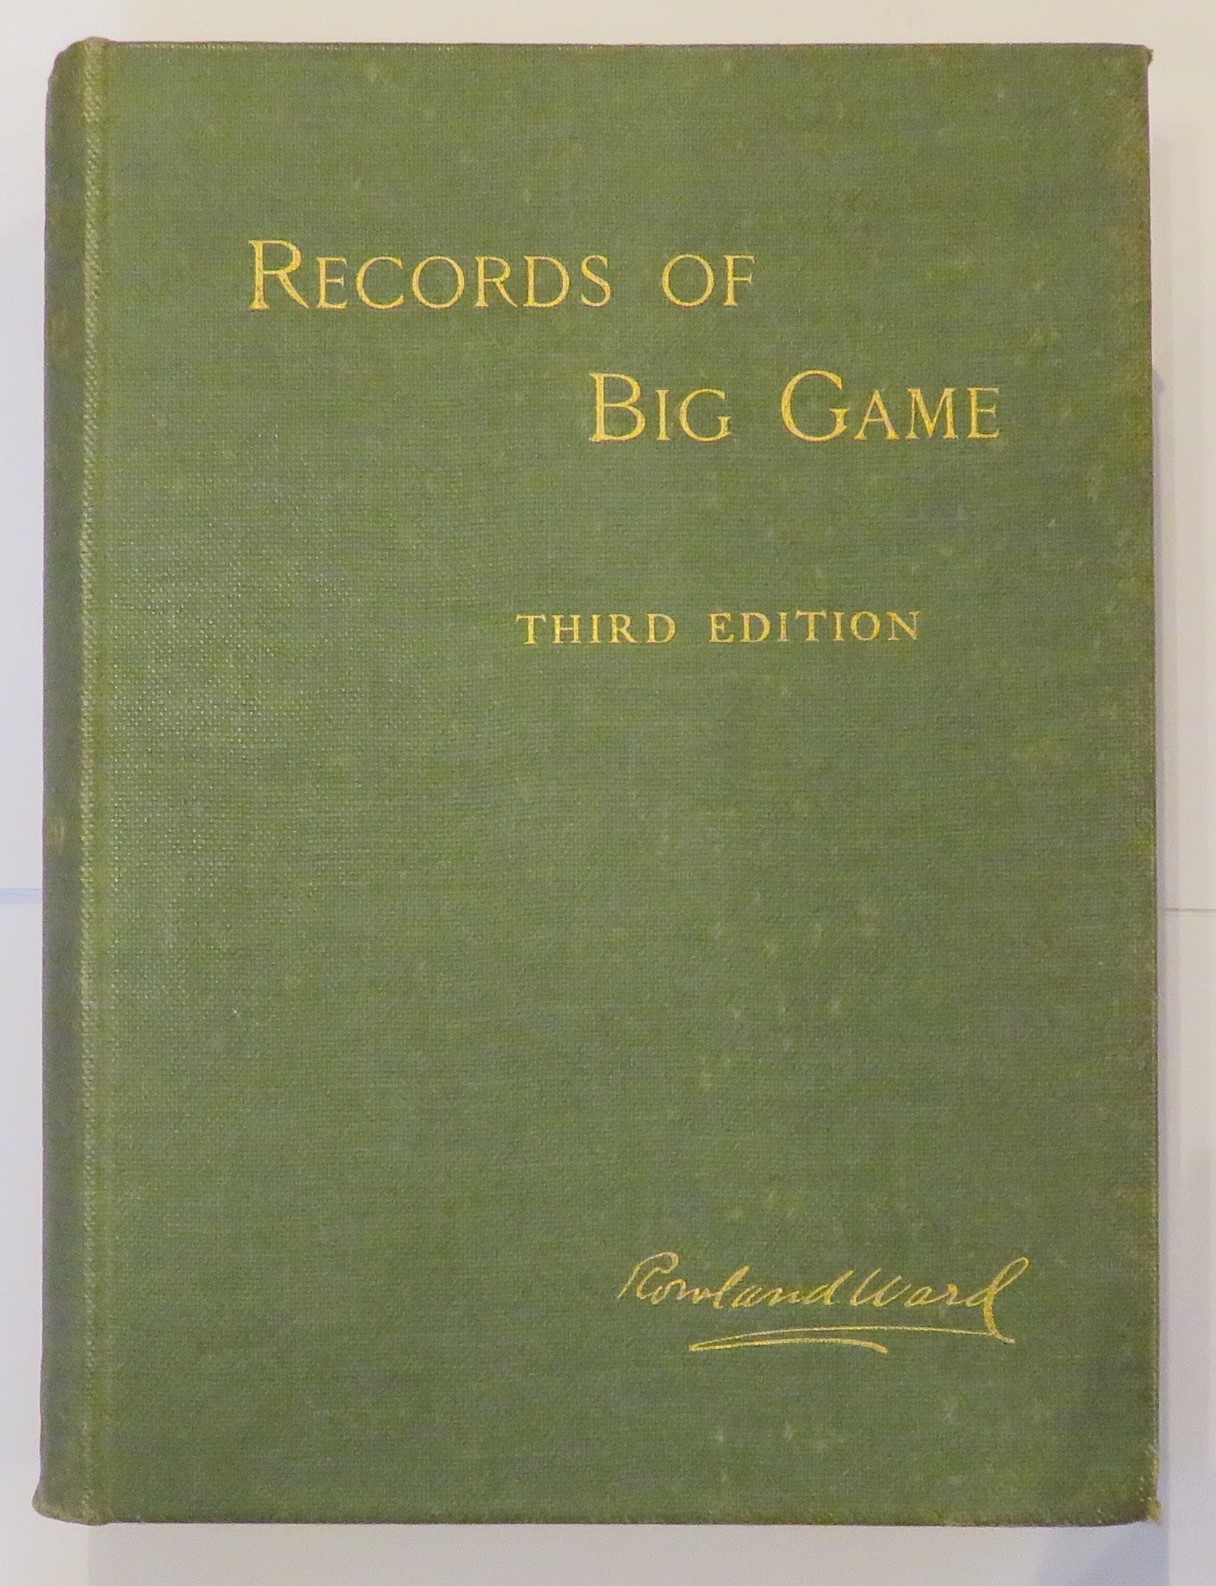 Records of Big Game Third Edition